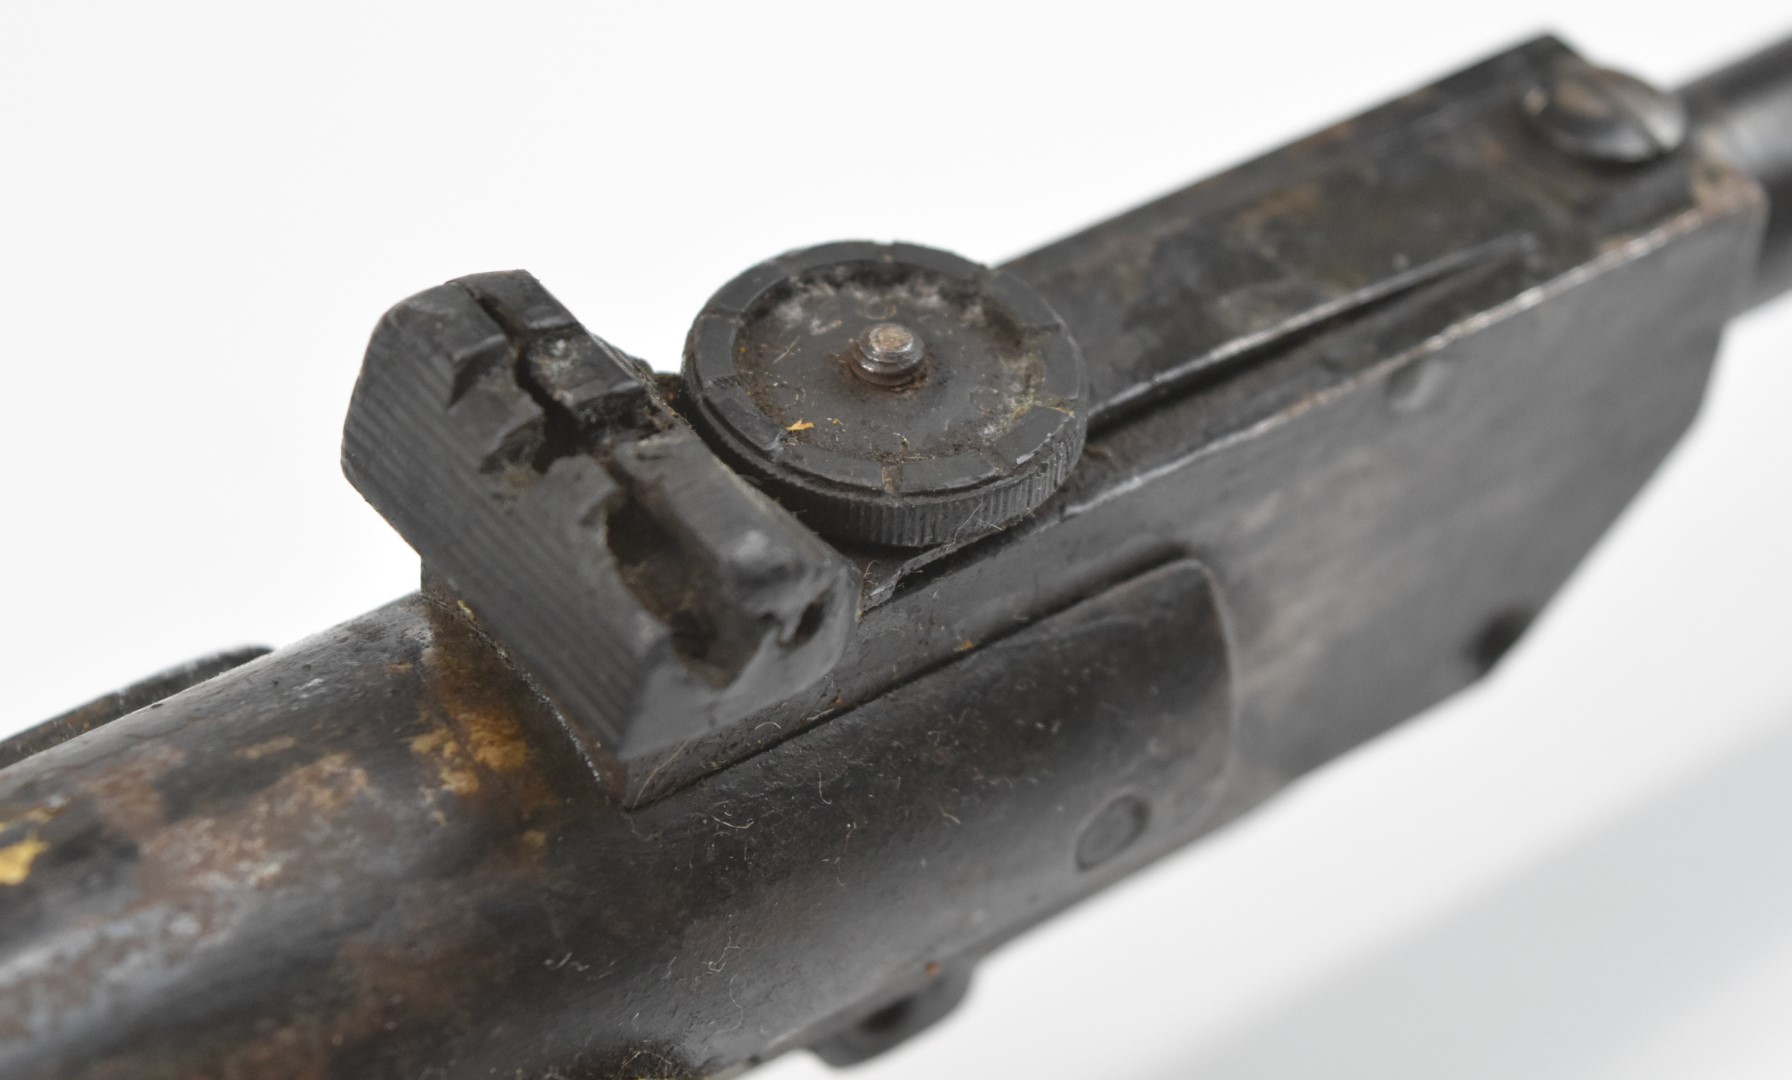 Gamo .22 air rifle with semi-pistol grip and adjustable sights, serial number T68059. - Image 8 of 16